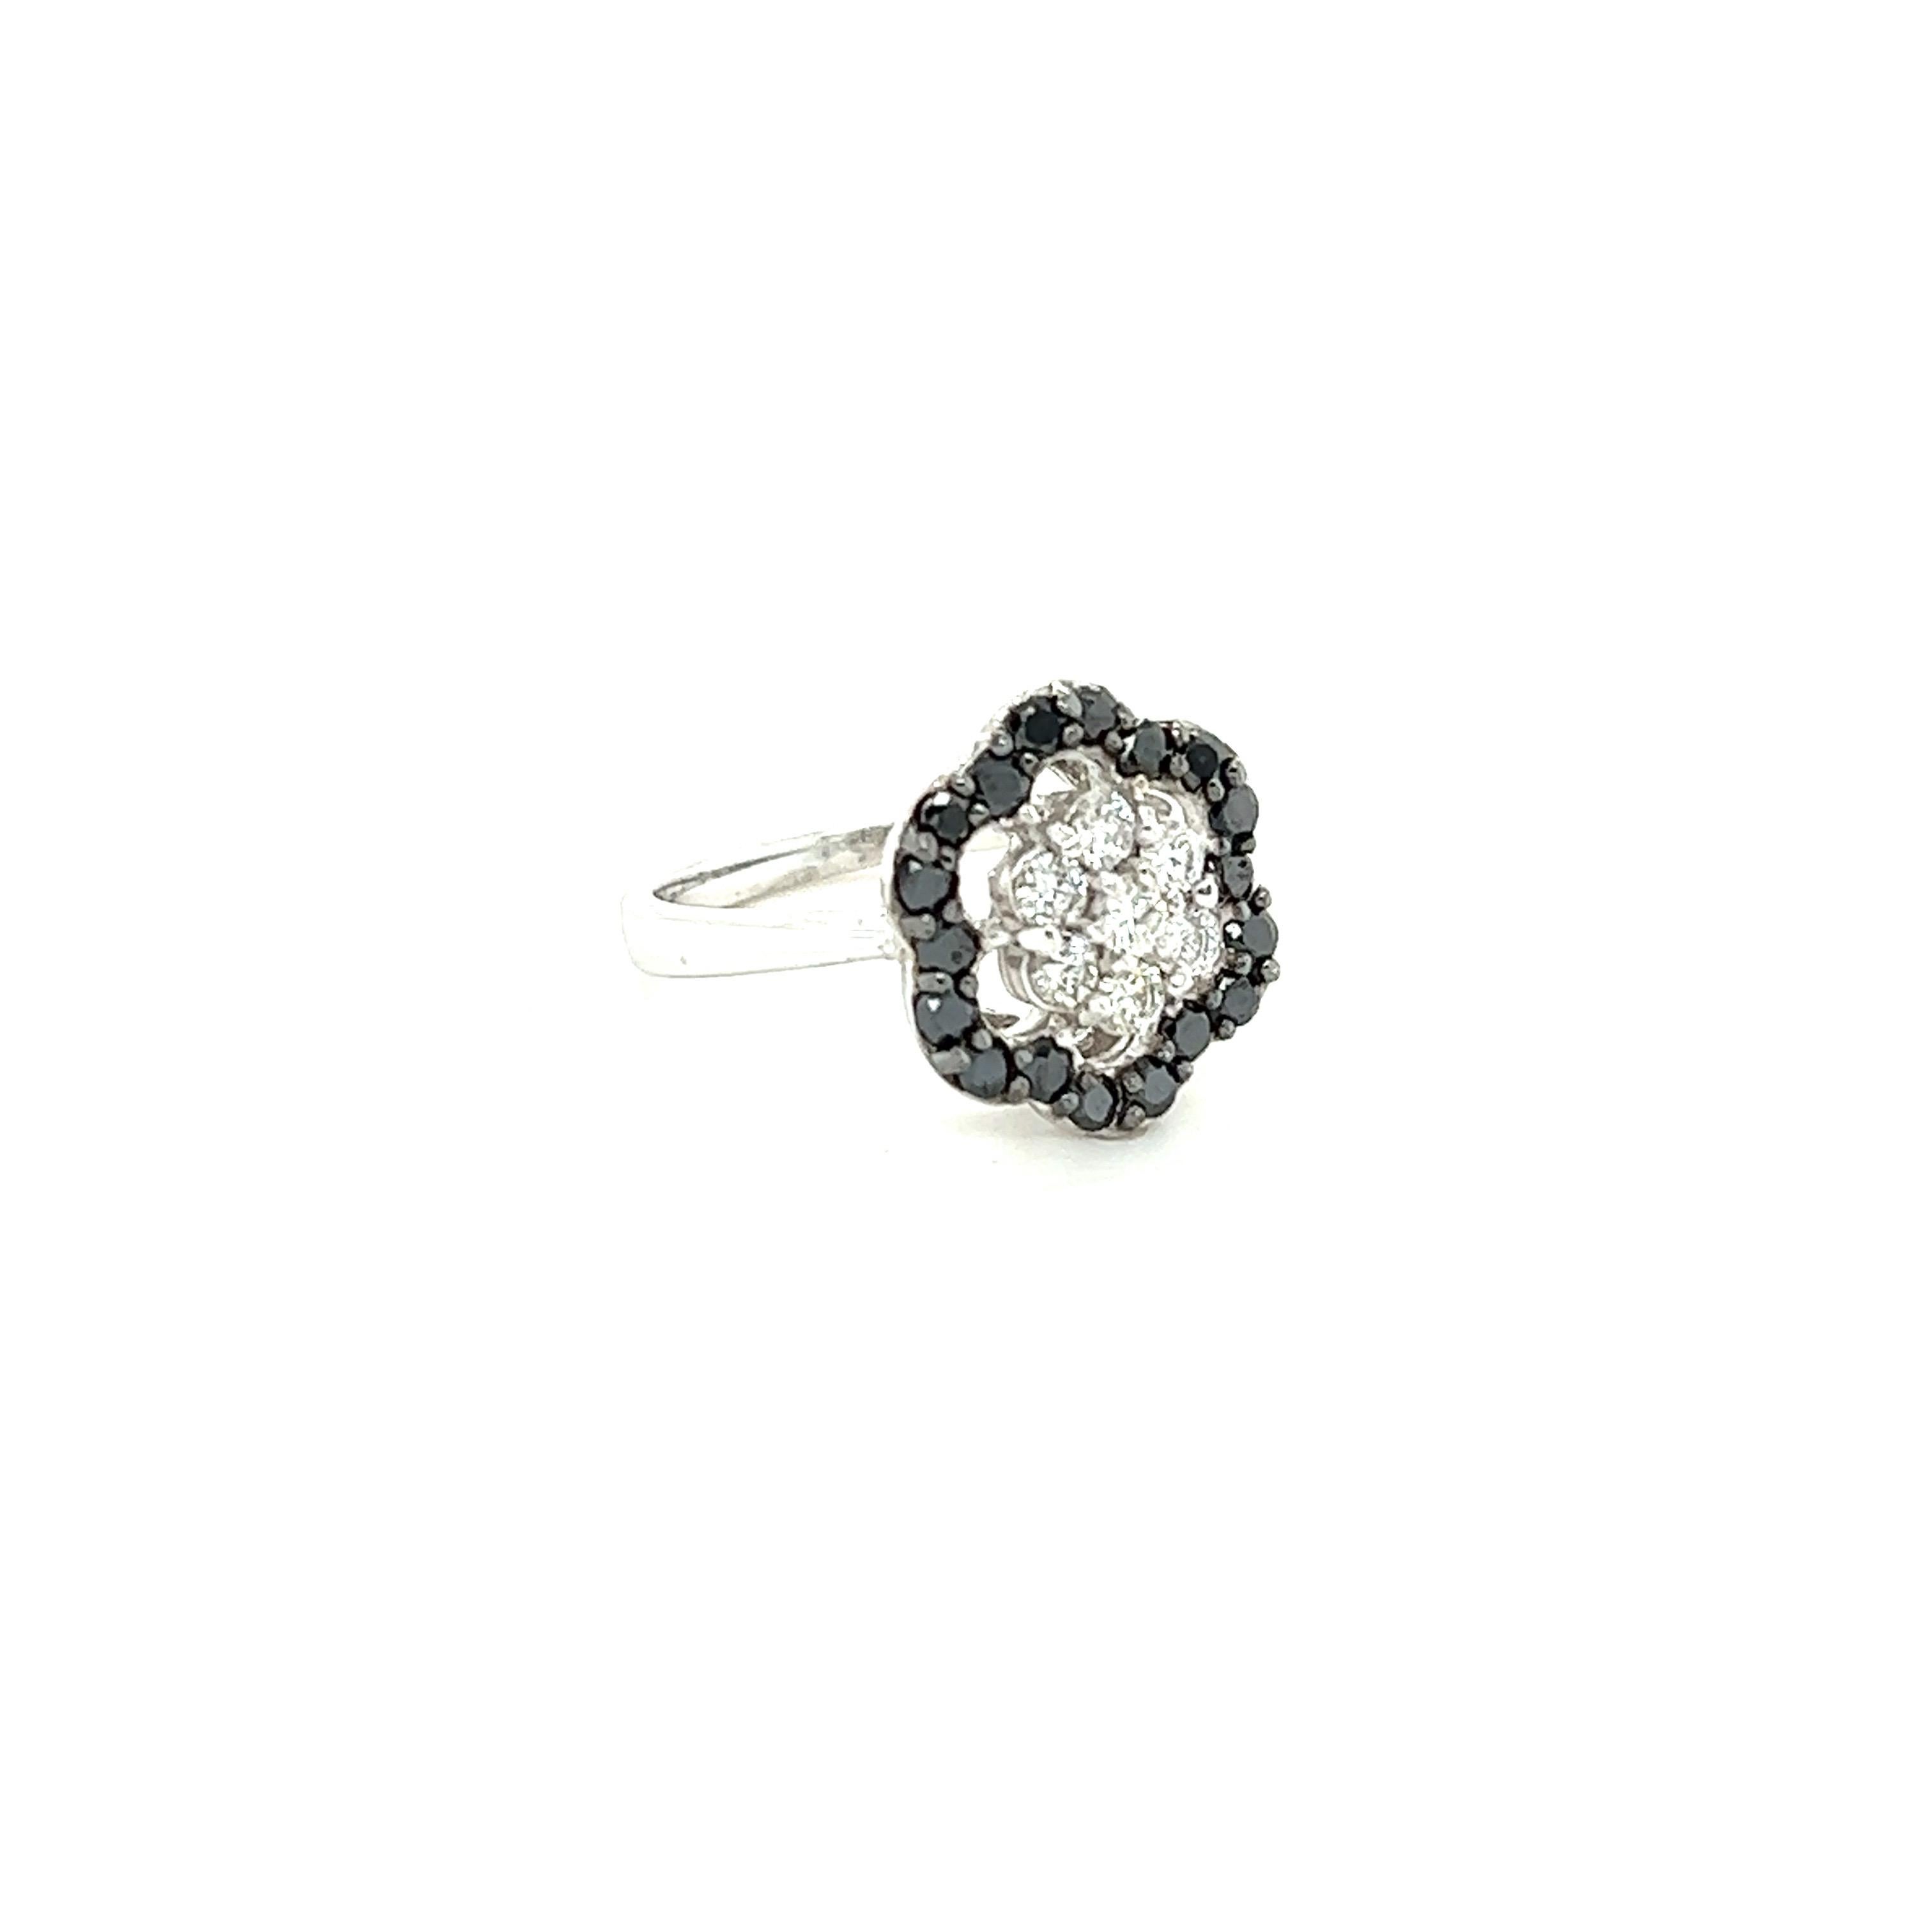 This ring has 18 Black Round Cut Natural Diamonds that weigh 0.62 carats and 7 Round Cut Natural Diamonds that weigh 0.37 carats. The clarity and color are SI-F. The total carat weight of the ring is 0.99 carats. 

Curated in 14 Karat White Gold and